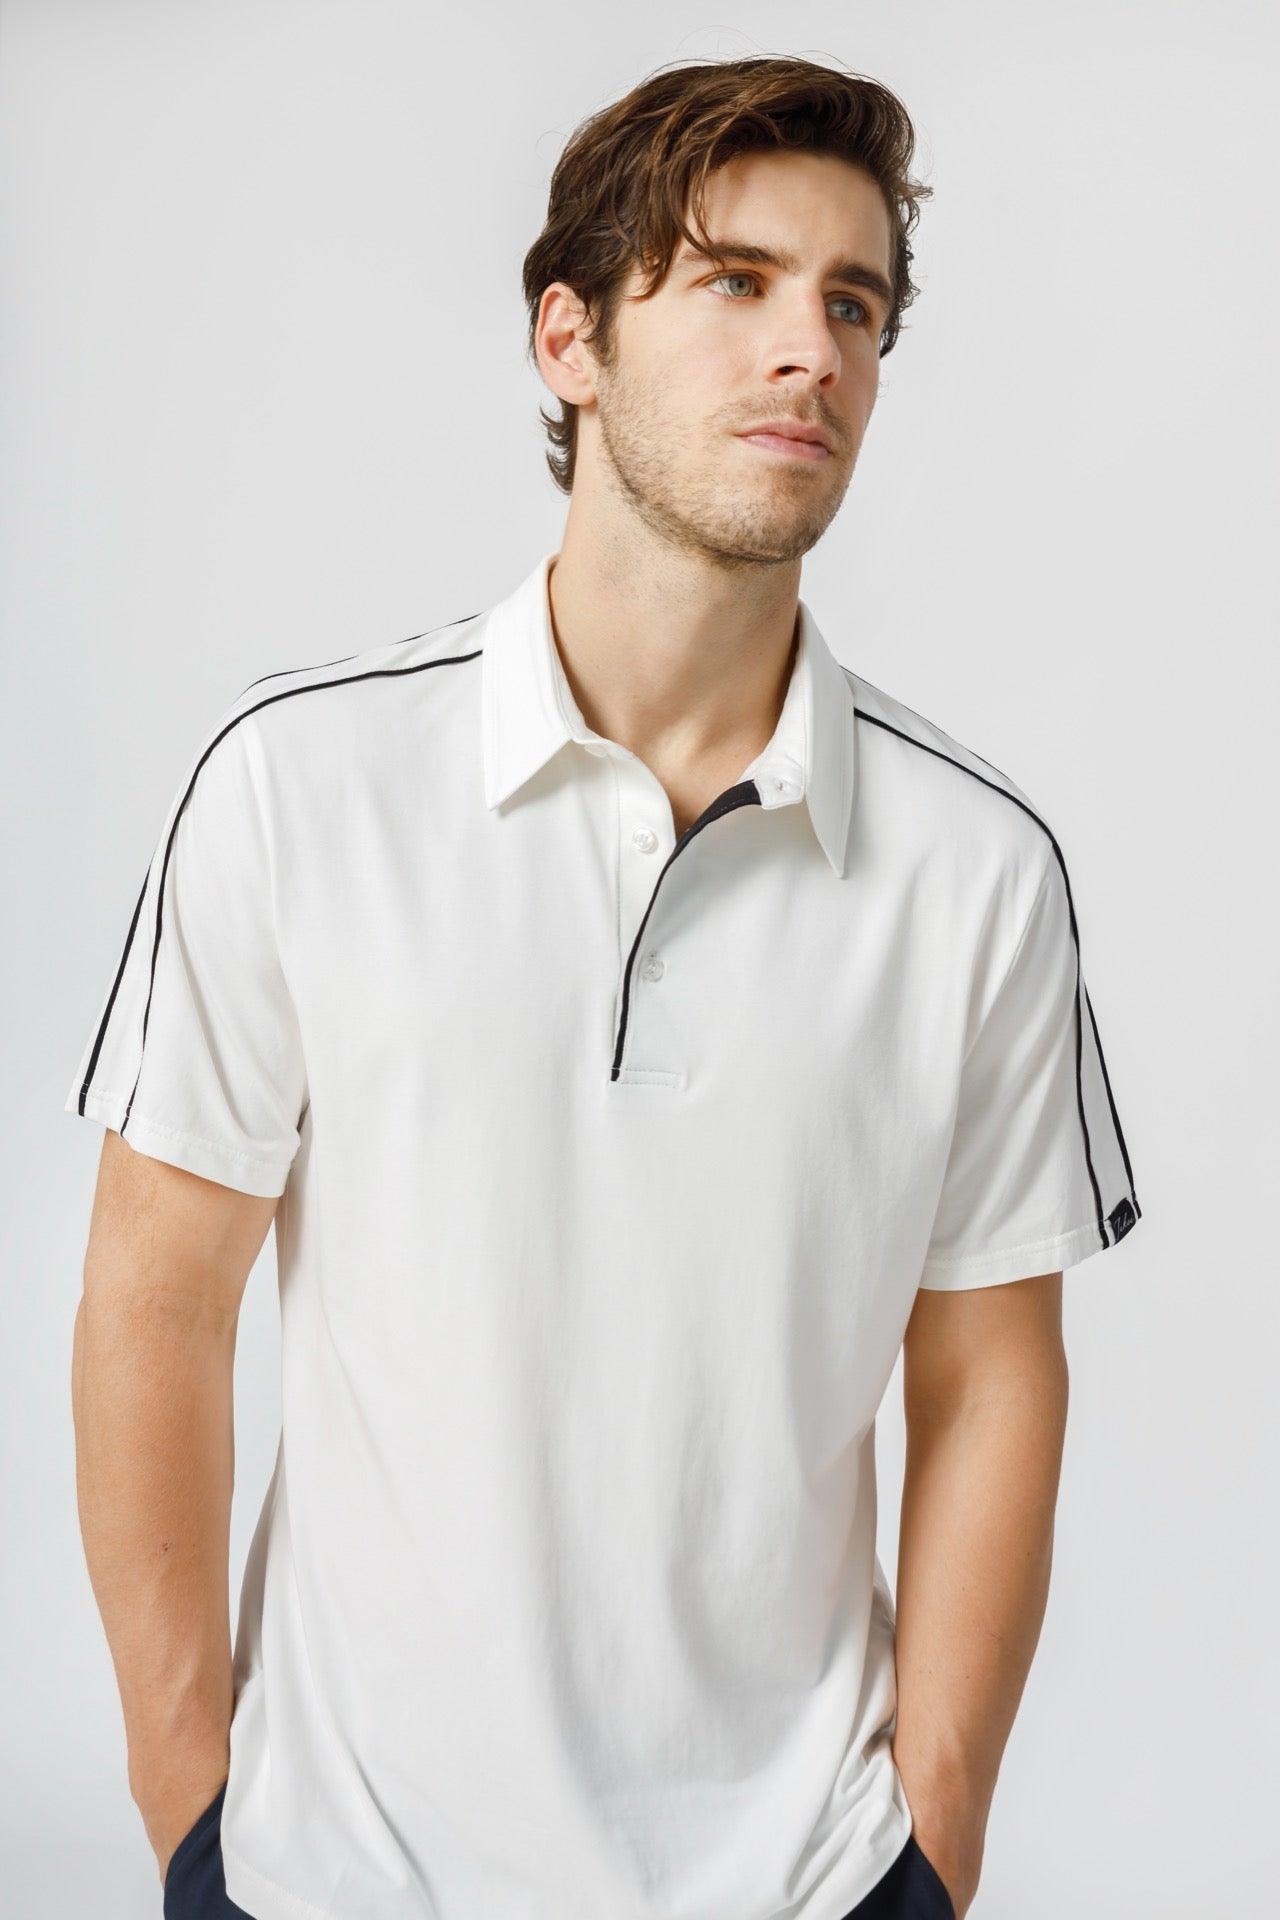 Men's Piping Accent Color Block Polo Shirt - NOT LABELED